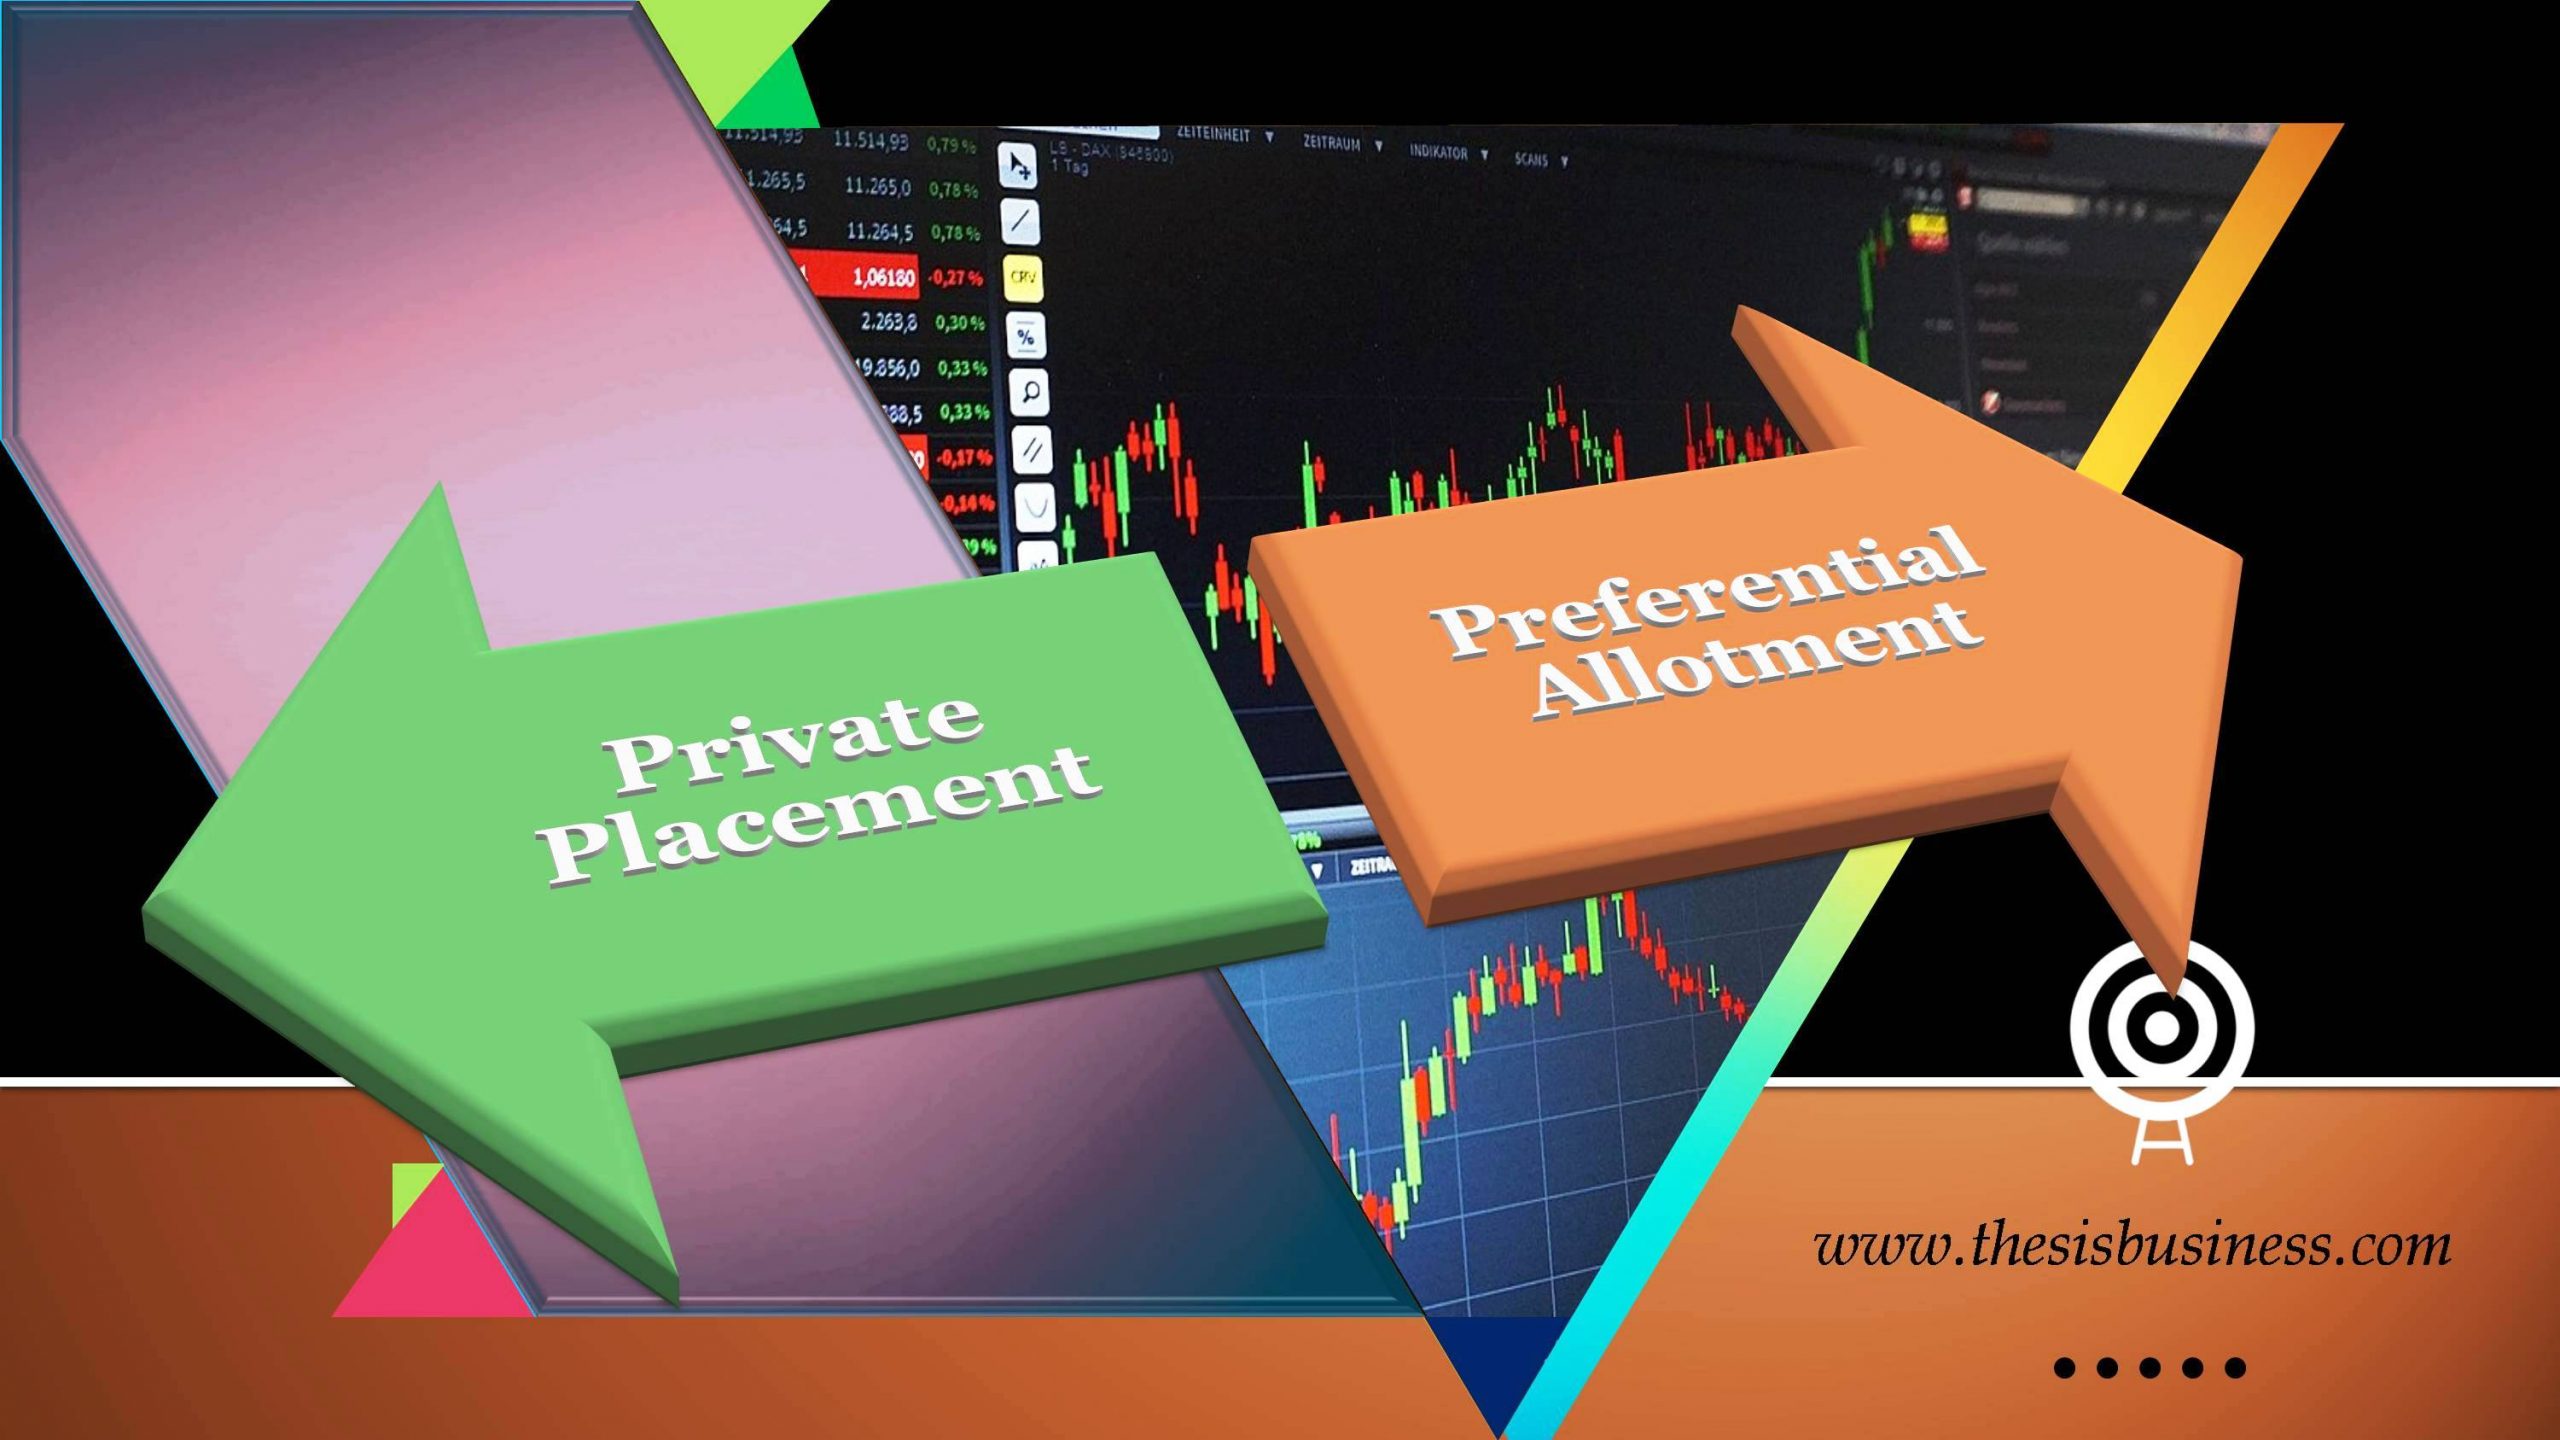 difference between private placement and preferential allotment